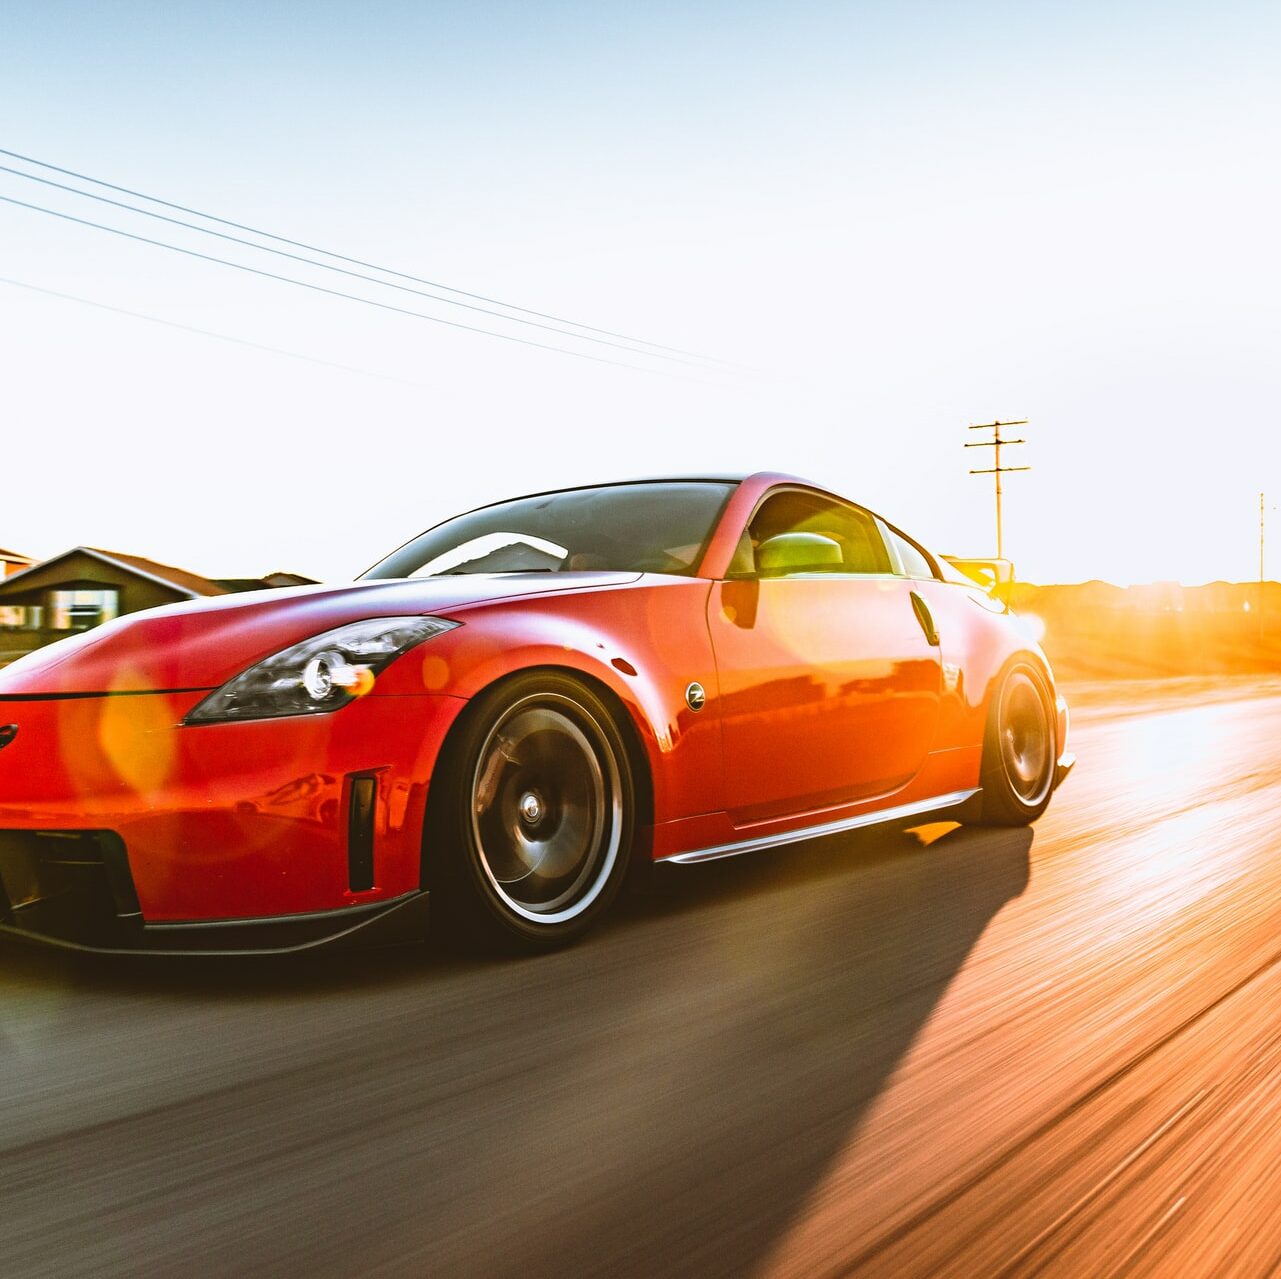 Cheap-Cars-That-Look-Like-Sports Cars-Nissan-350Z